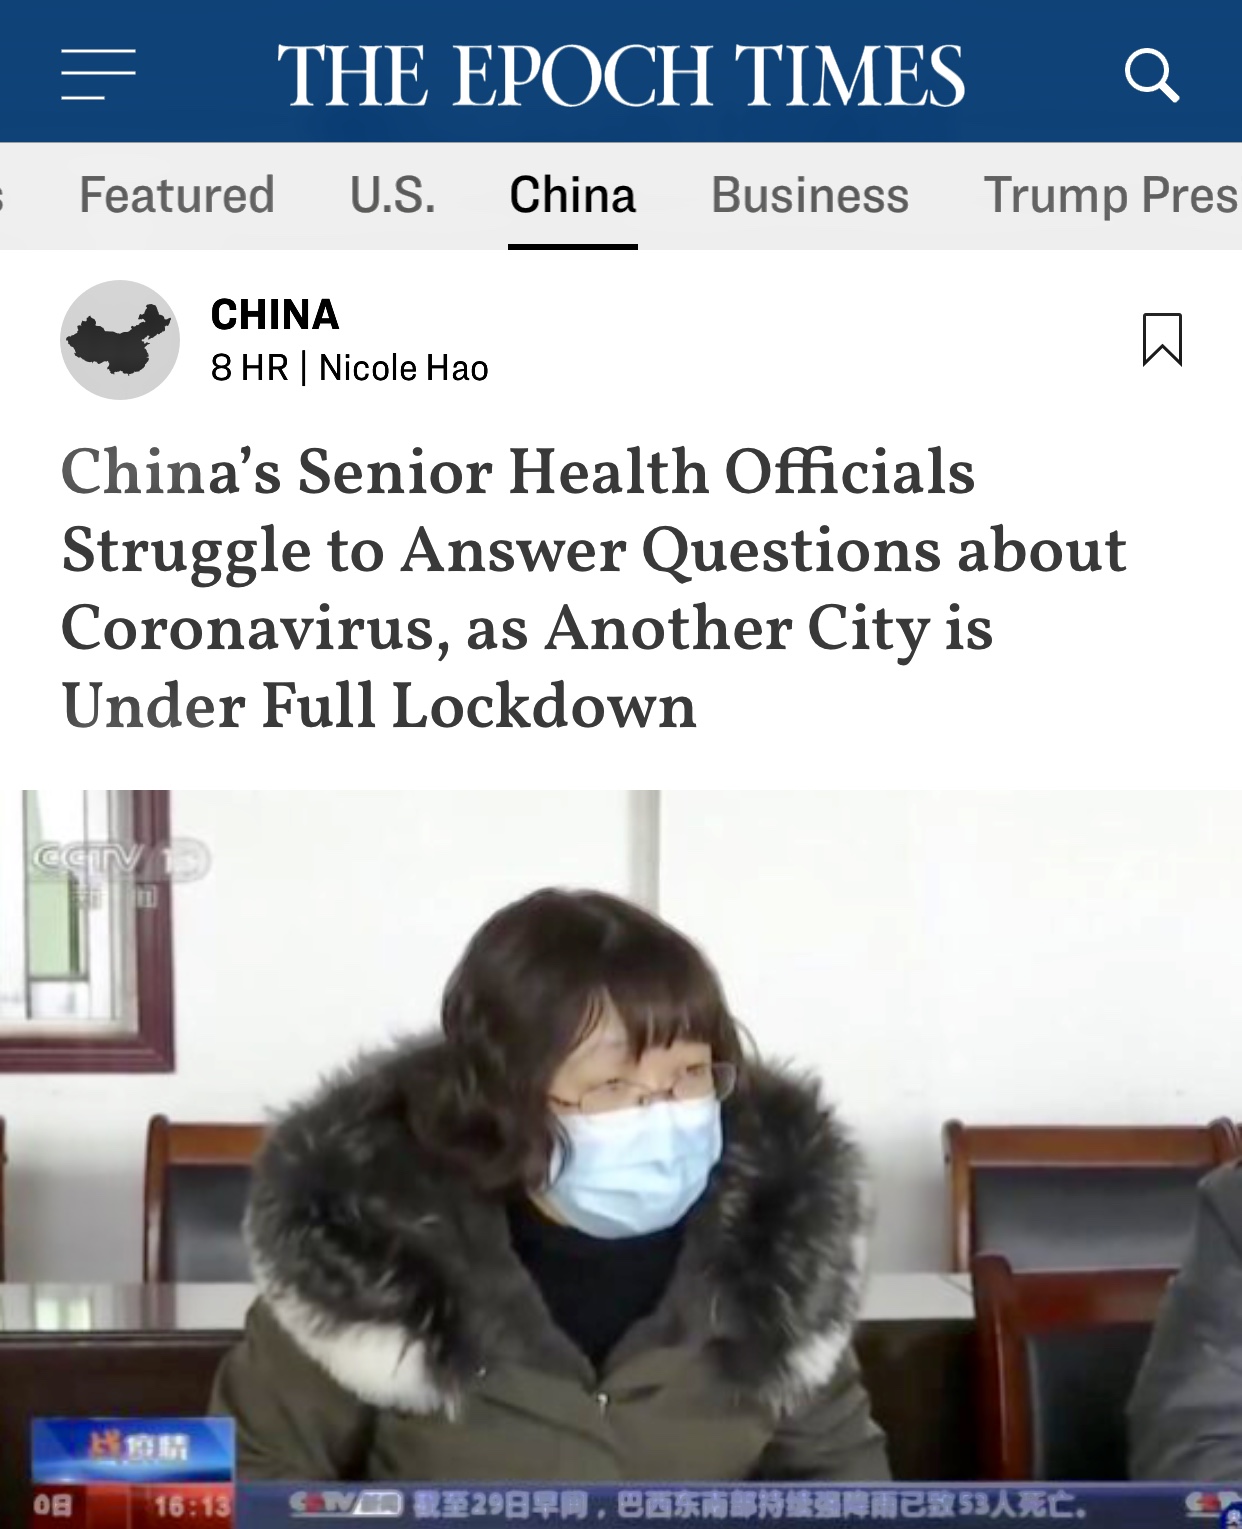 China’s Senior Health Officials Not Answering Questions Re: Coronavirus – Another City Under Full Lockdown